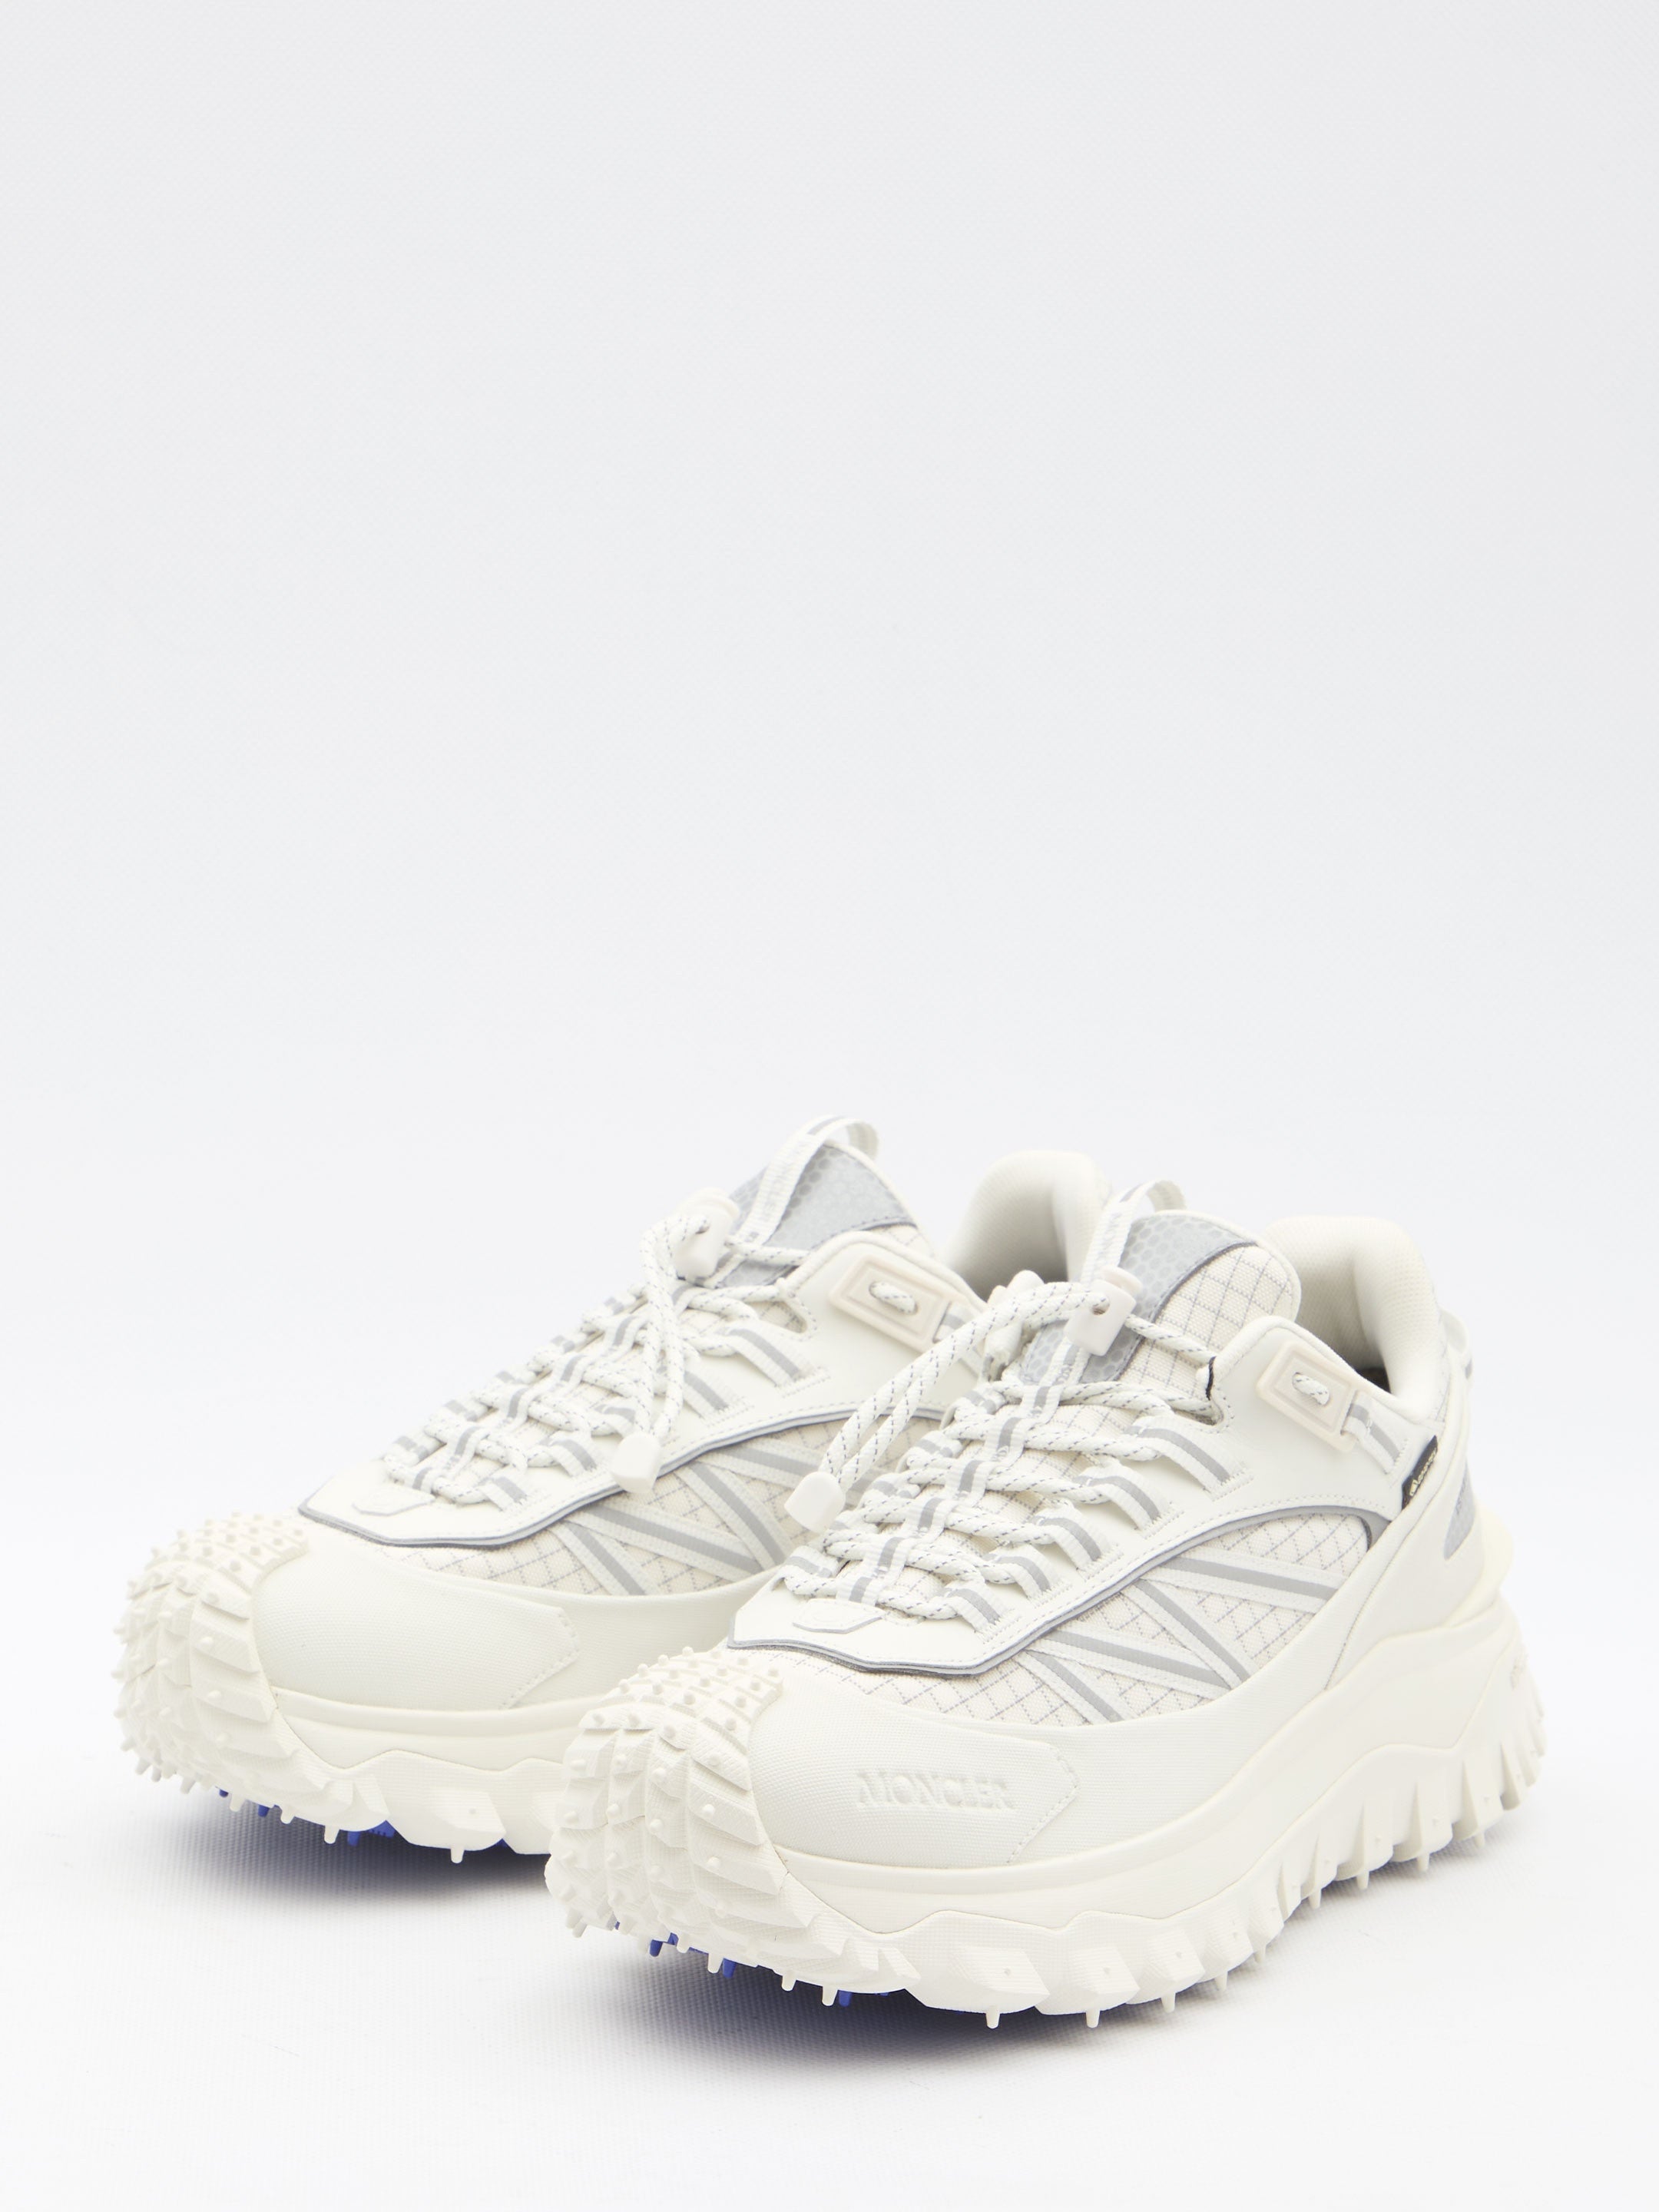 MONCLER-OUTLET-SALE-Trailgrip-GTX-sneakers-Sneakers-44-WHITE-ARCHIVE-COLLECTION-2.jpg